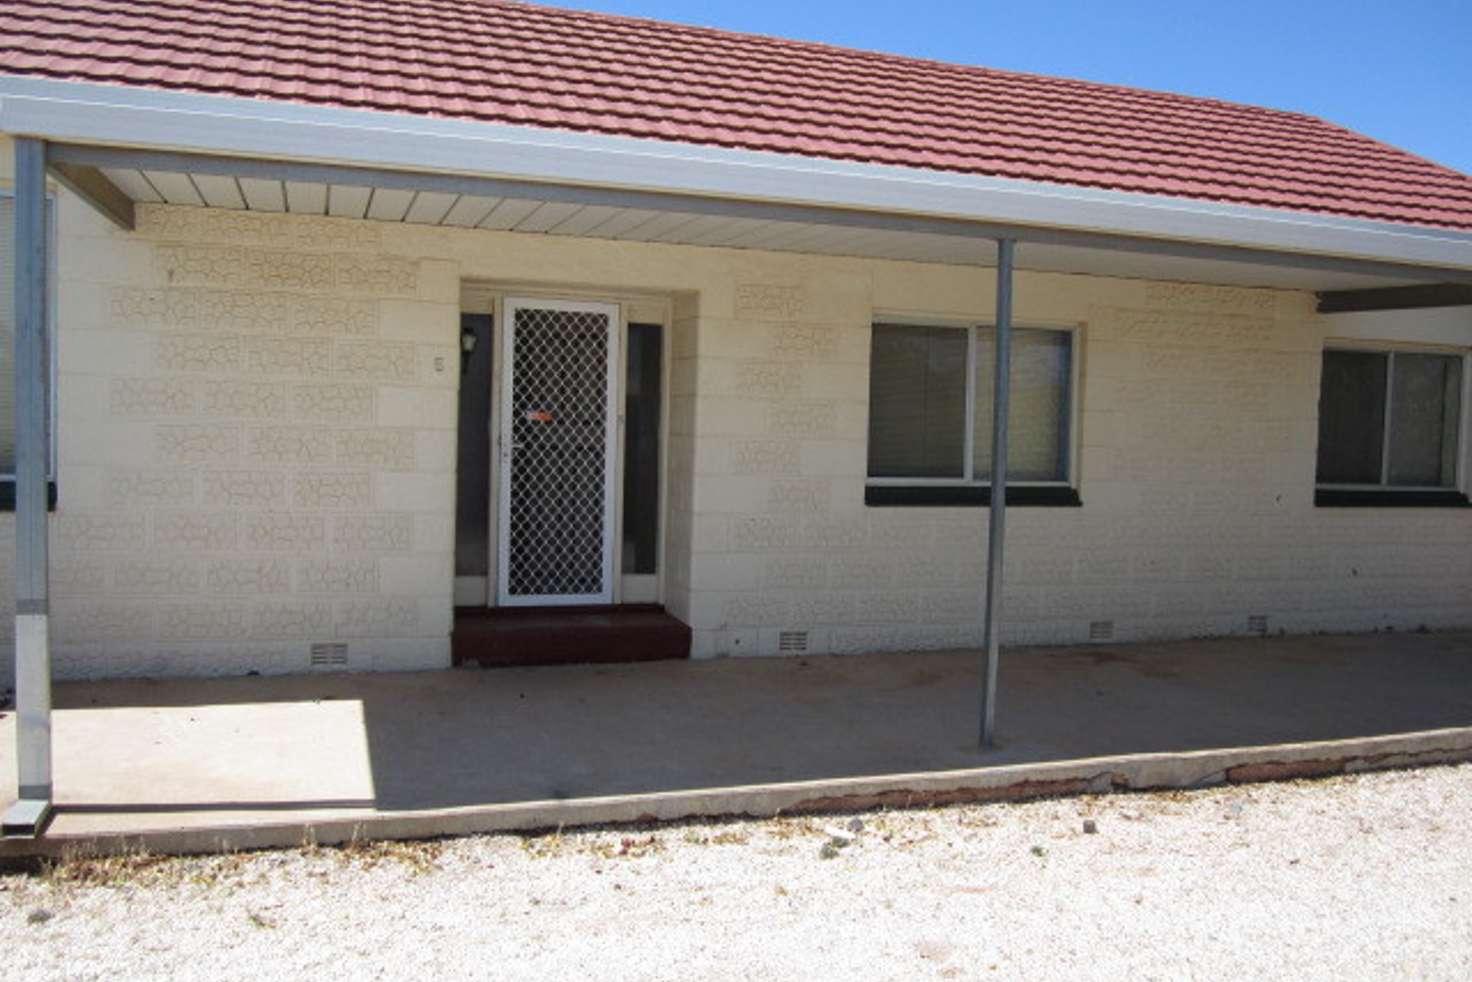 Main view of Homely house listing, 5 Clarke St, Broken Hill NSW 2880